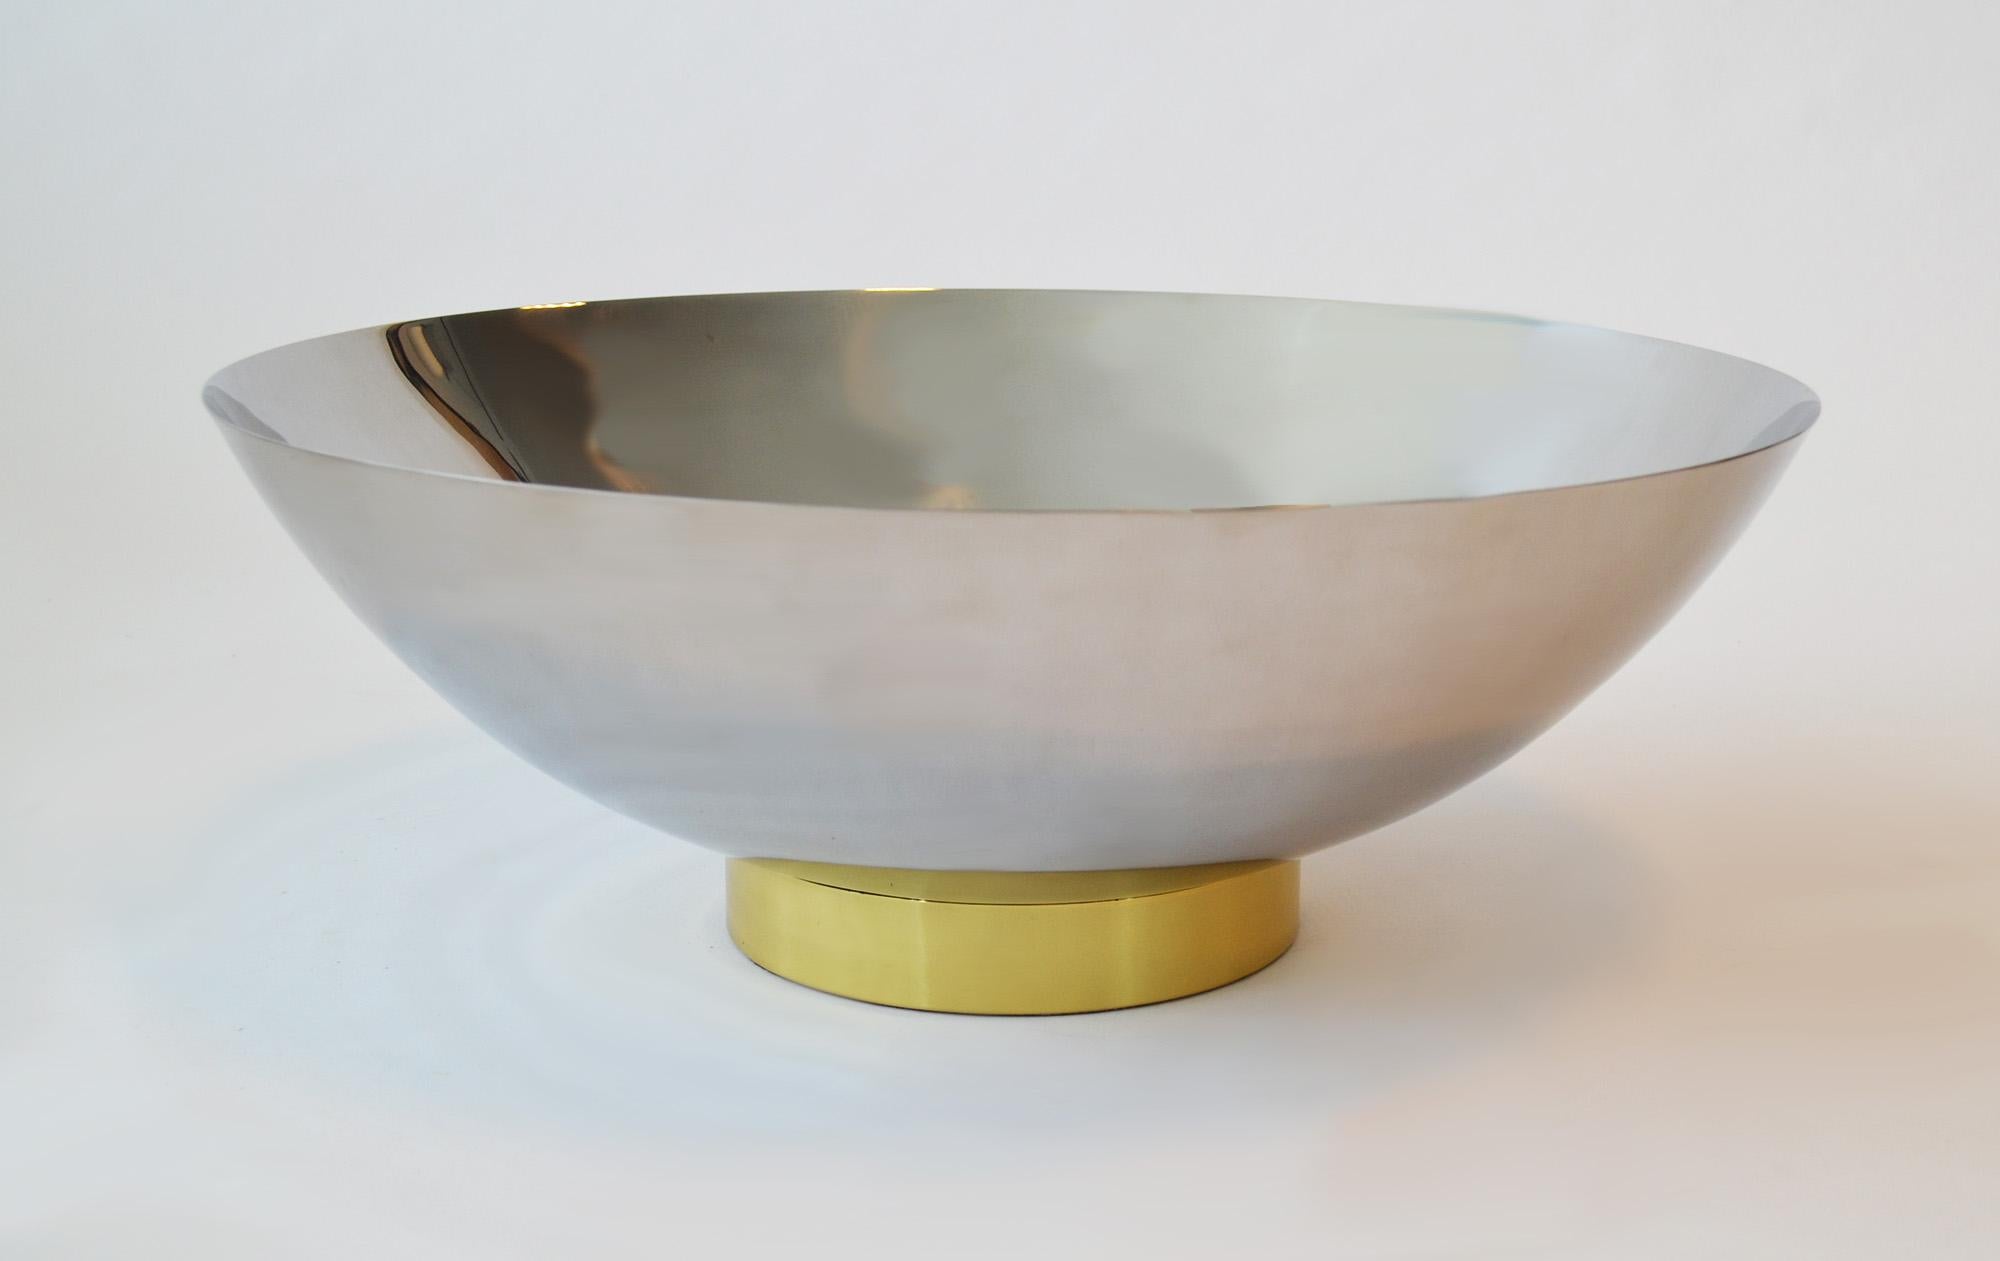 A modern mirror polished chrome and brass centerpiece bowl Art Deco machine age
A modern mirror polished chrome and brass centerpiece bowl c. 1990's 
Sally Sirkin Lewis for J. Robert Scott designs, Los Angeles, USA, purchased mid- to late-